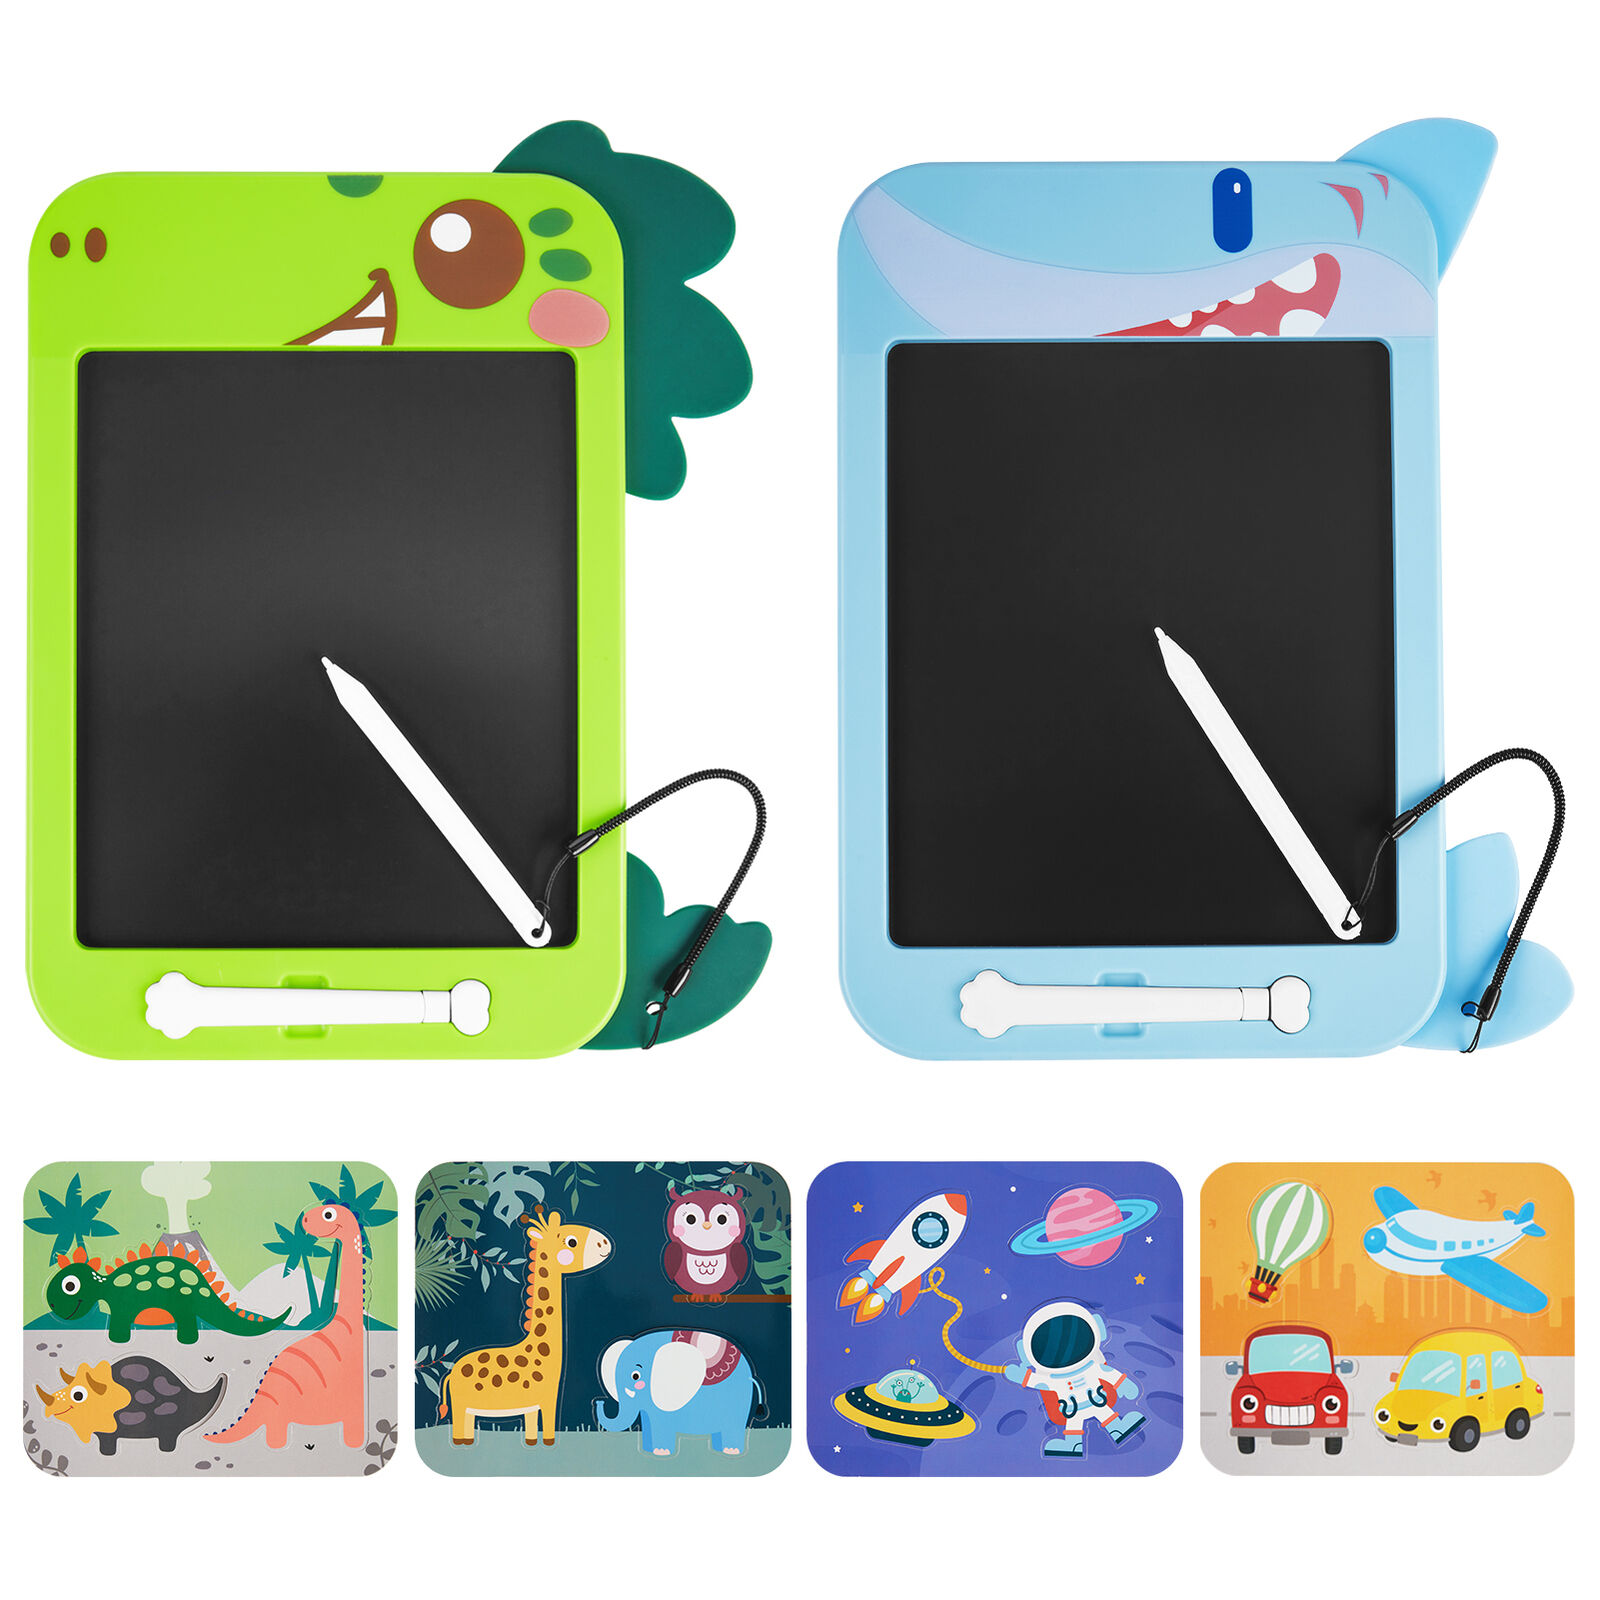 LCD Writing Tablet, 2 Pcs Electronic Writing Drawing Board Pad Erasable Kids Toy